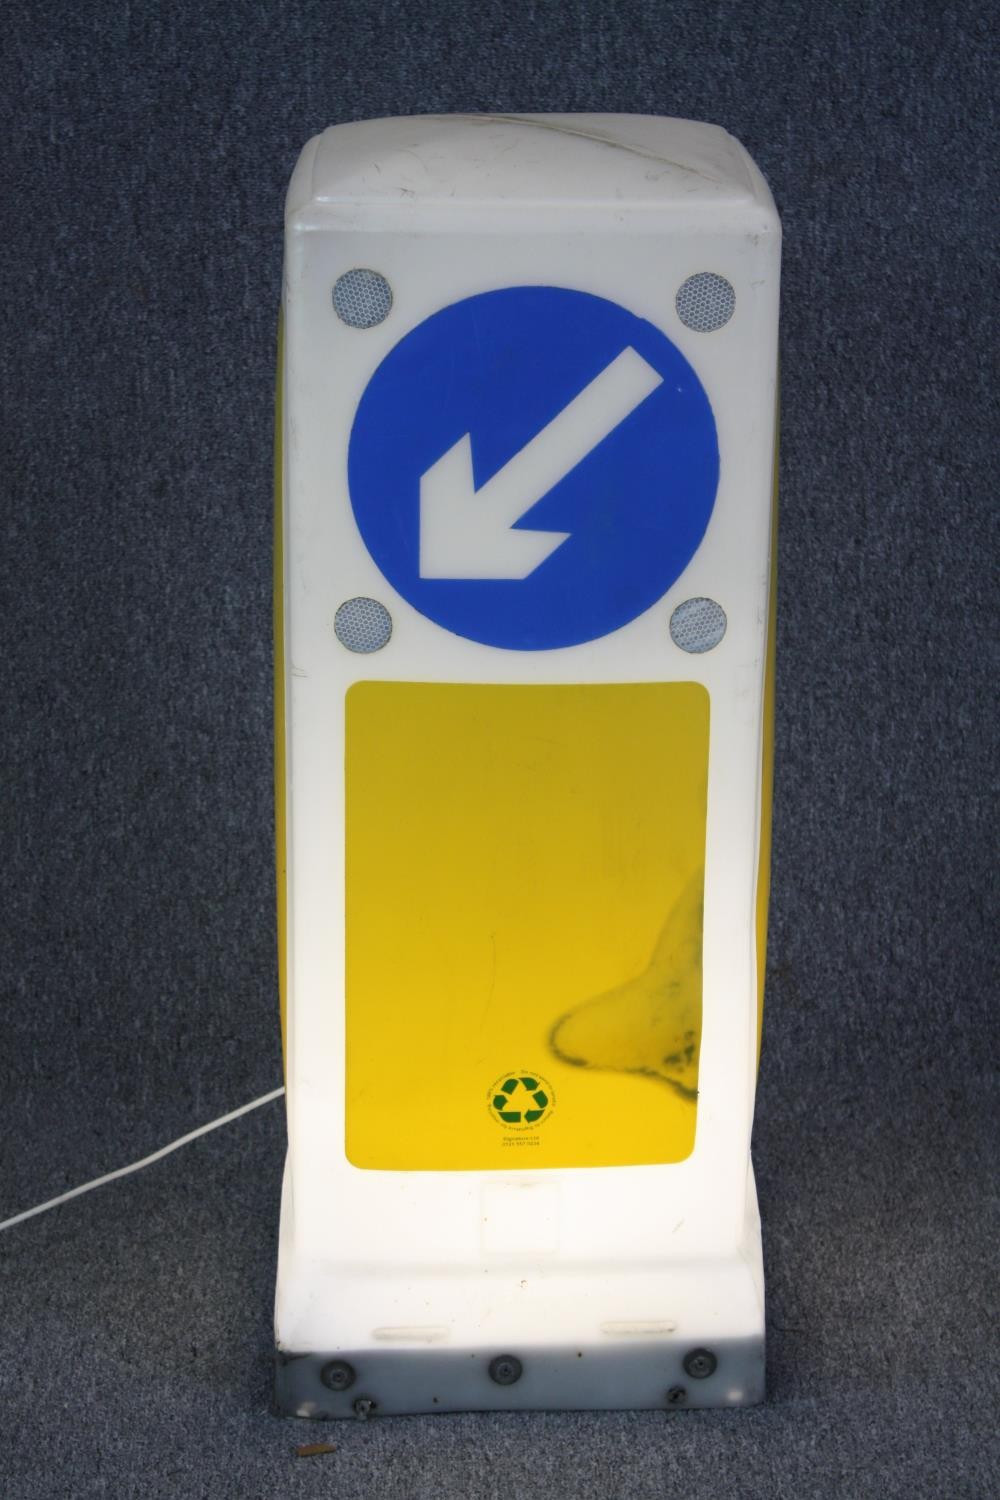 An illuminated keep left road traffic sign. In working order. H.93 W.34 D.34 cm. - Image 4 of 5